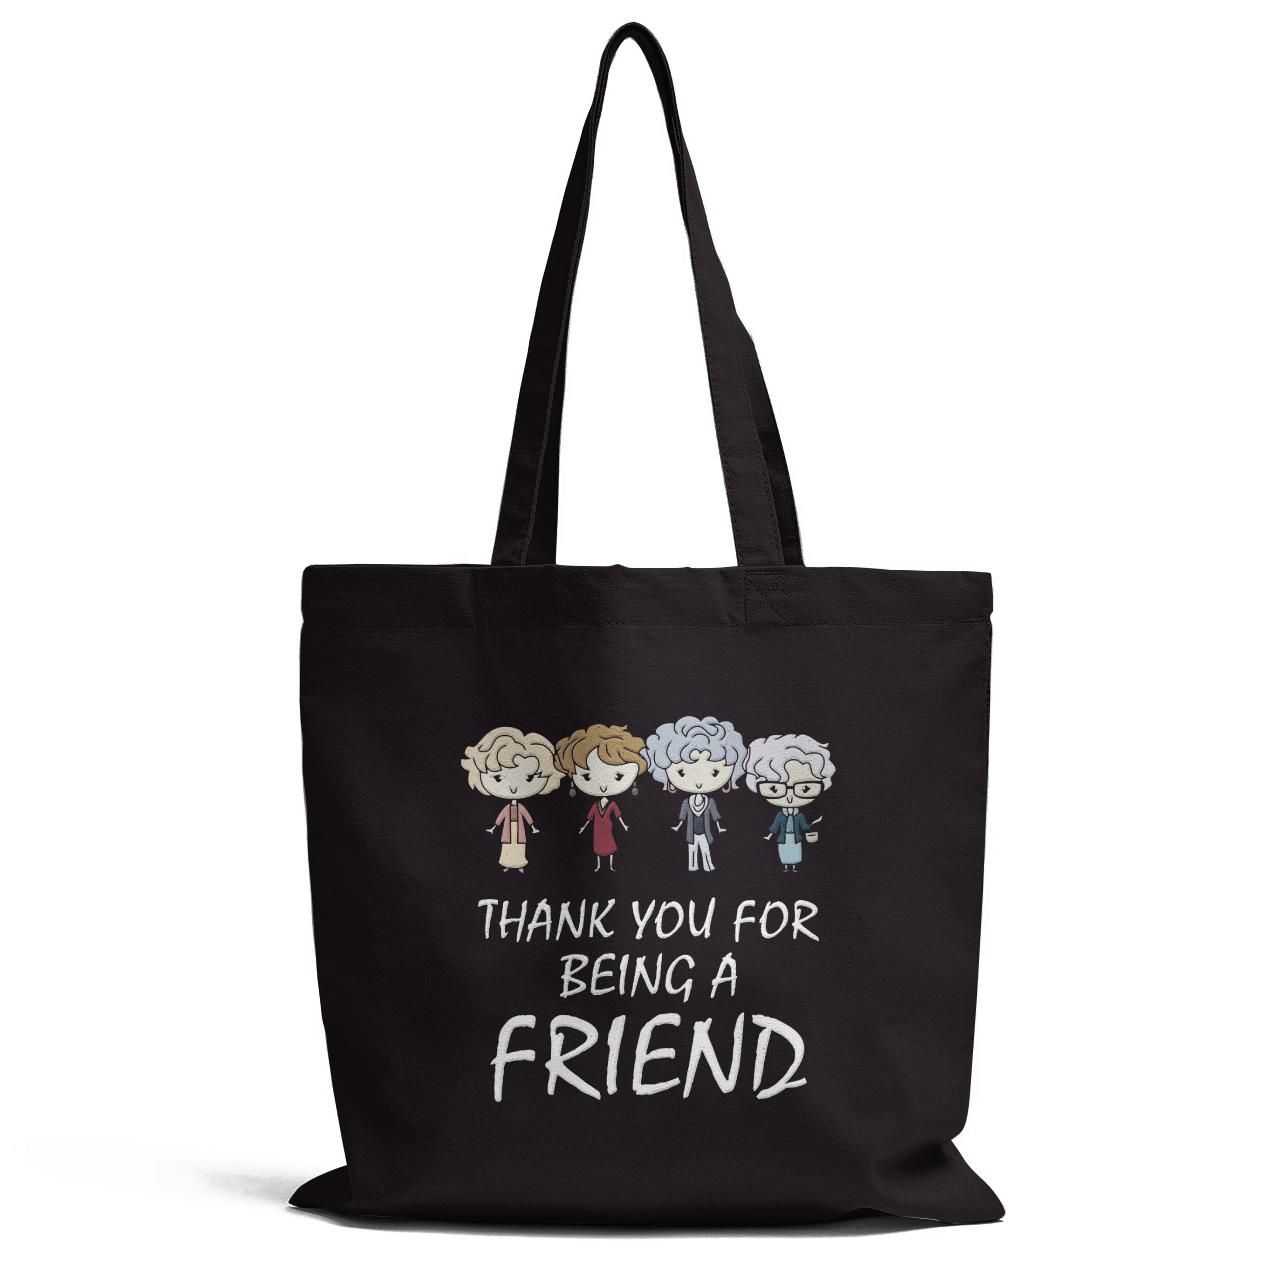 Thank You For Being A Friend Tote Bag